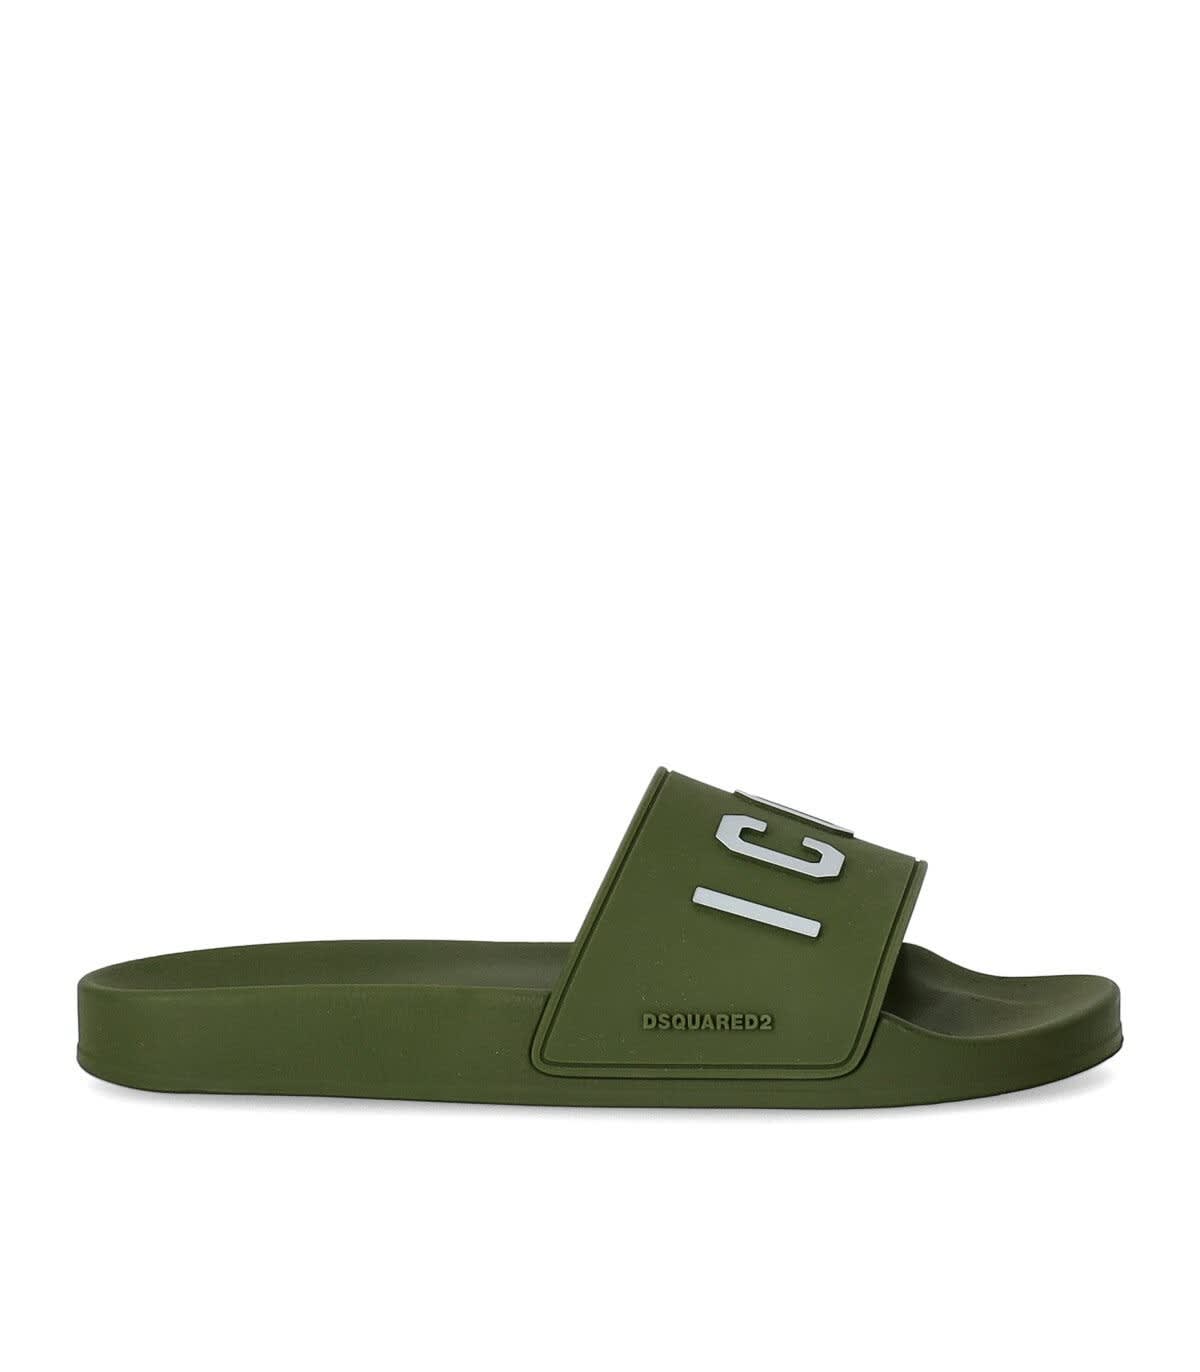 DSQUARED2 DSQUARED2 BE ICON MILITARY GREEN SLIDE